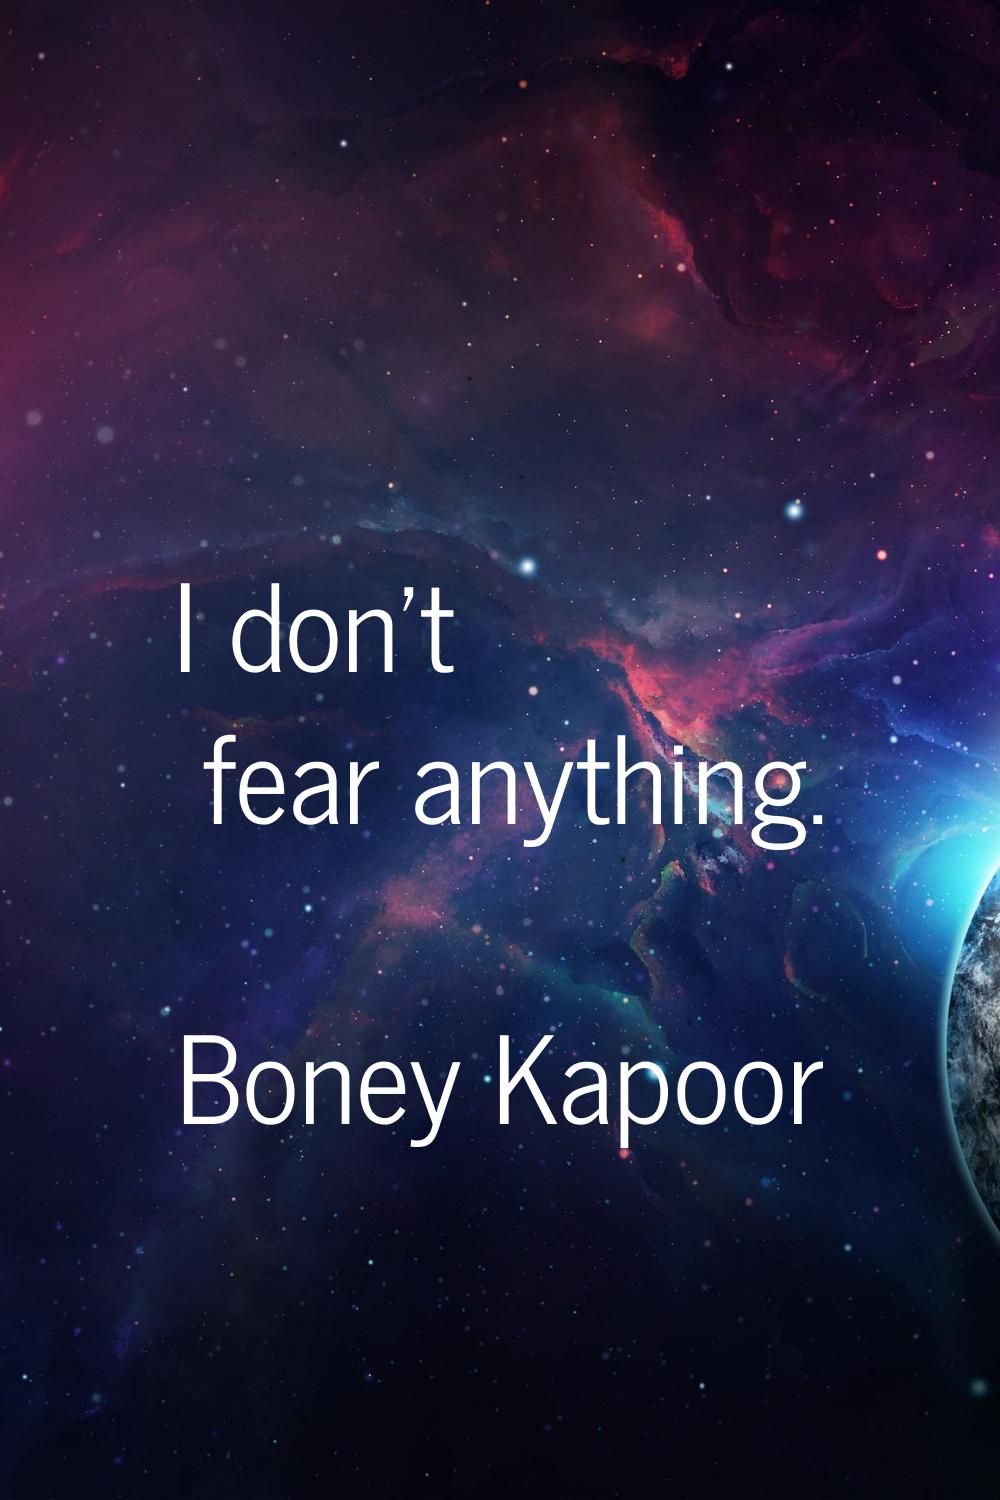 I don't fear anything.